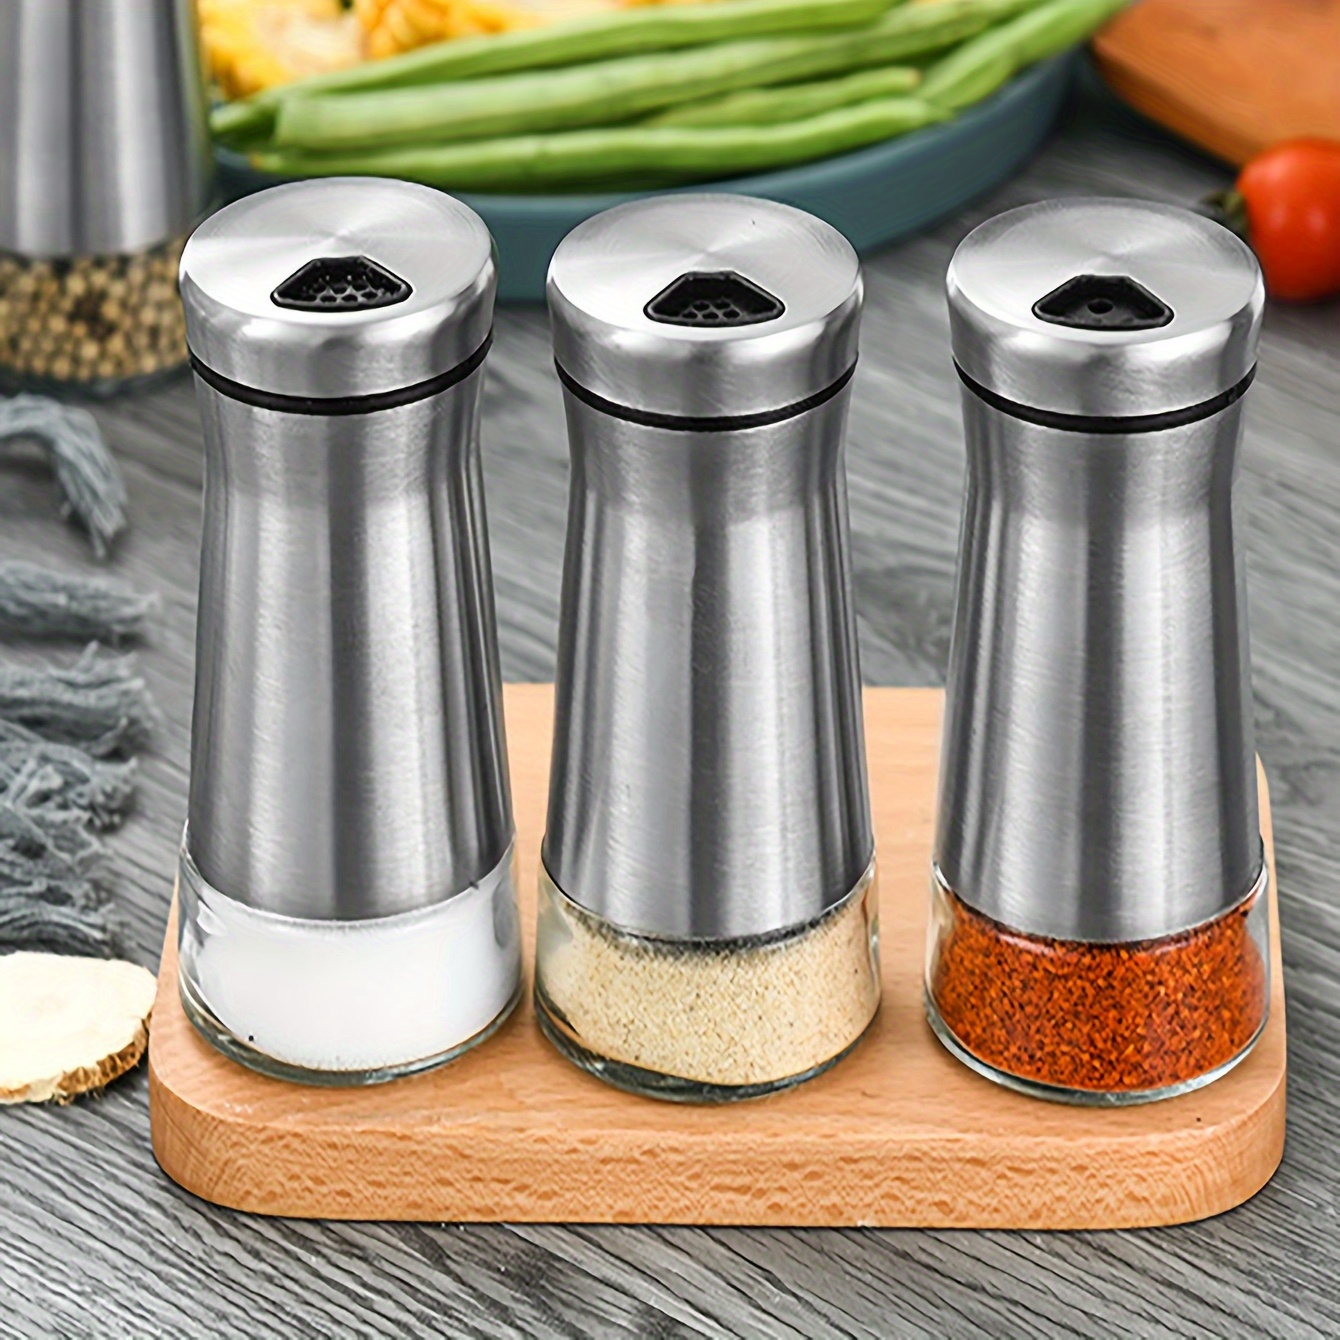 Salt and Pepper Shakers with Adjustable Pour Holes, Glass Salt